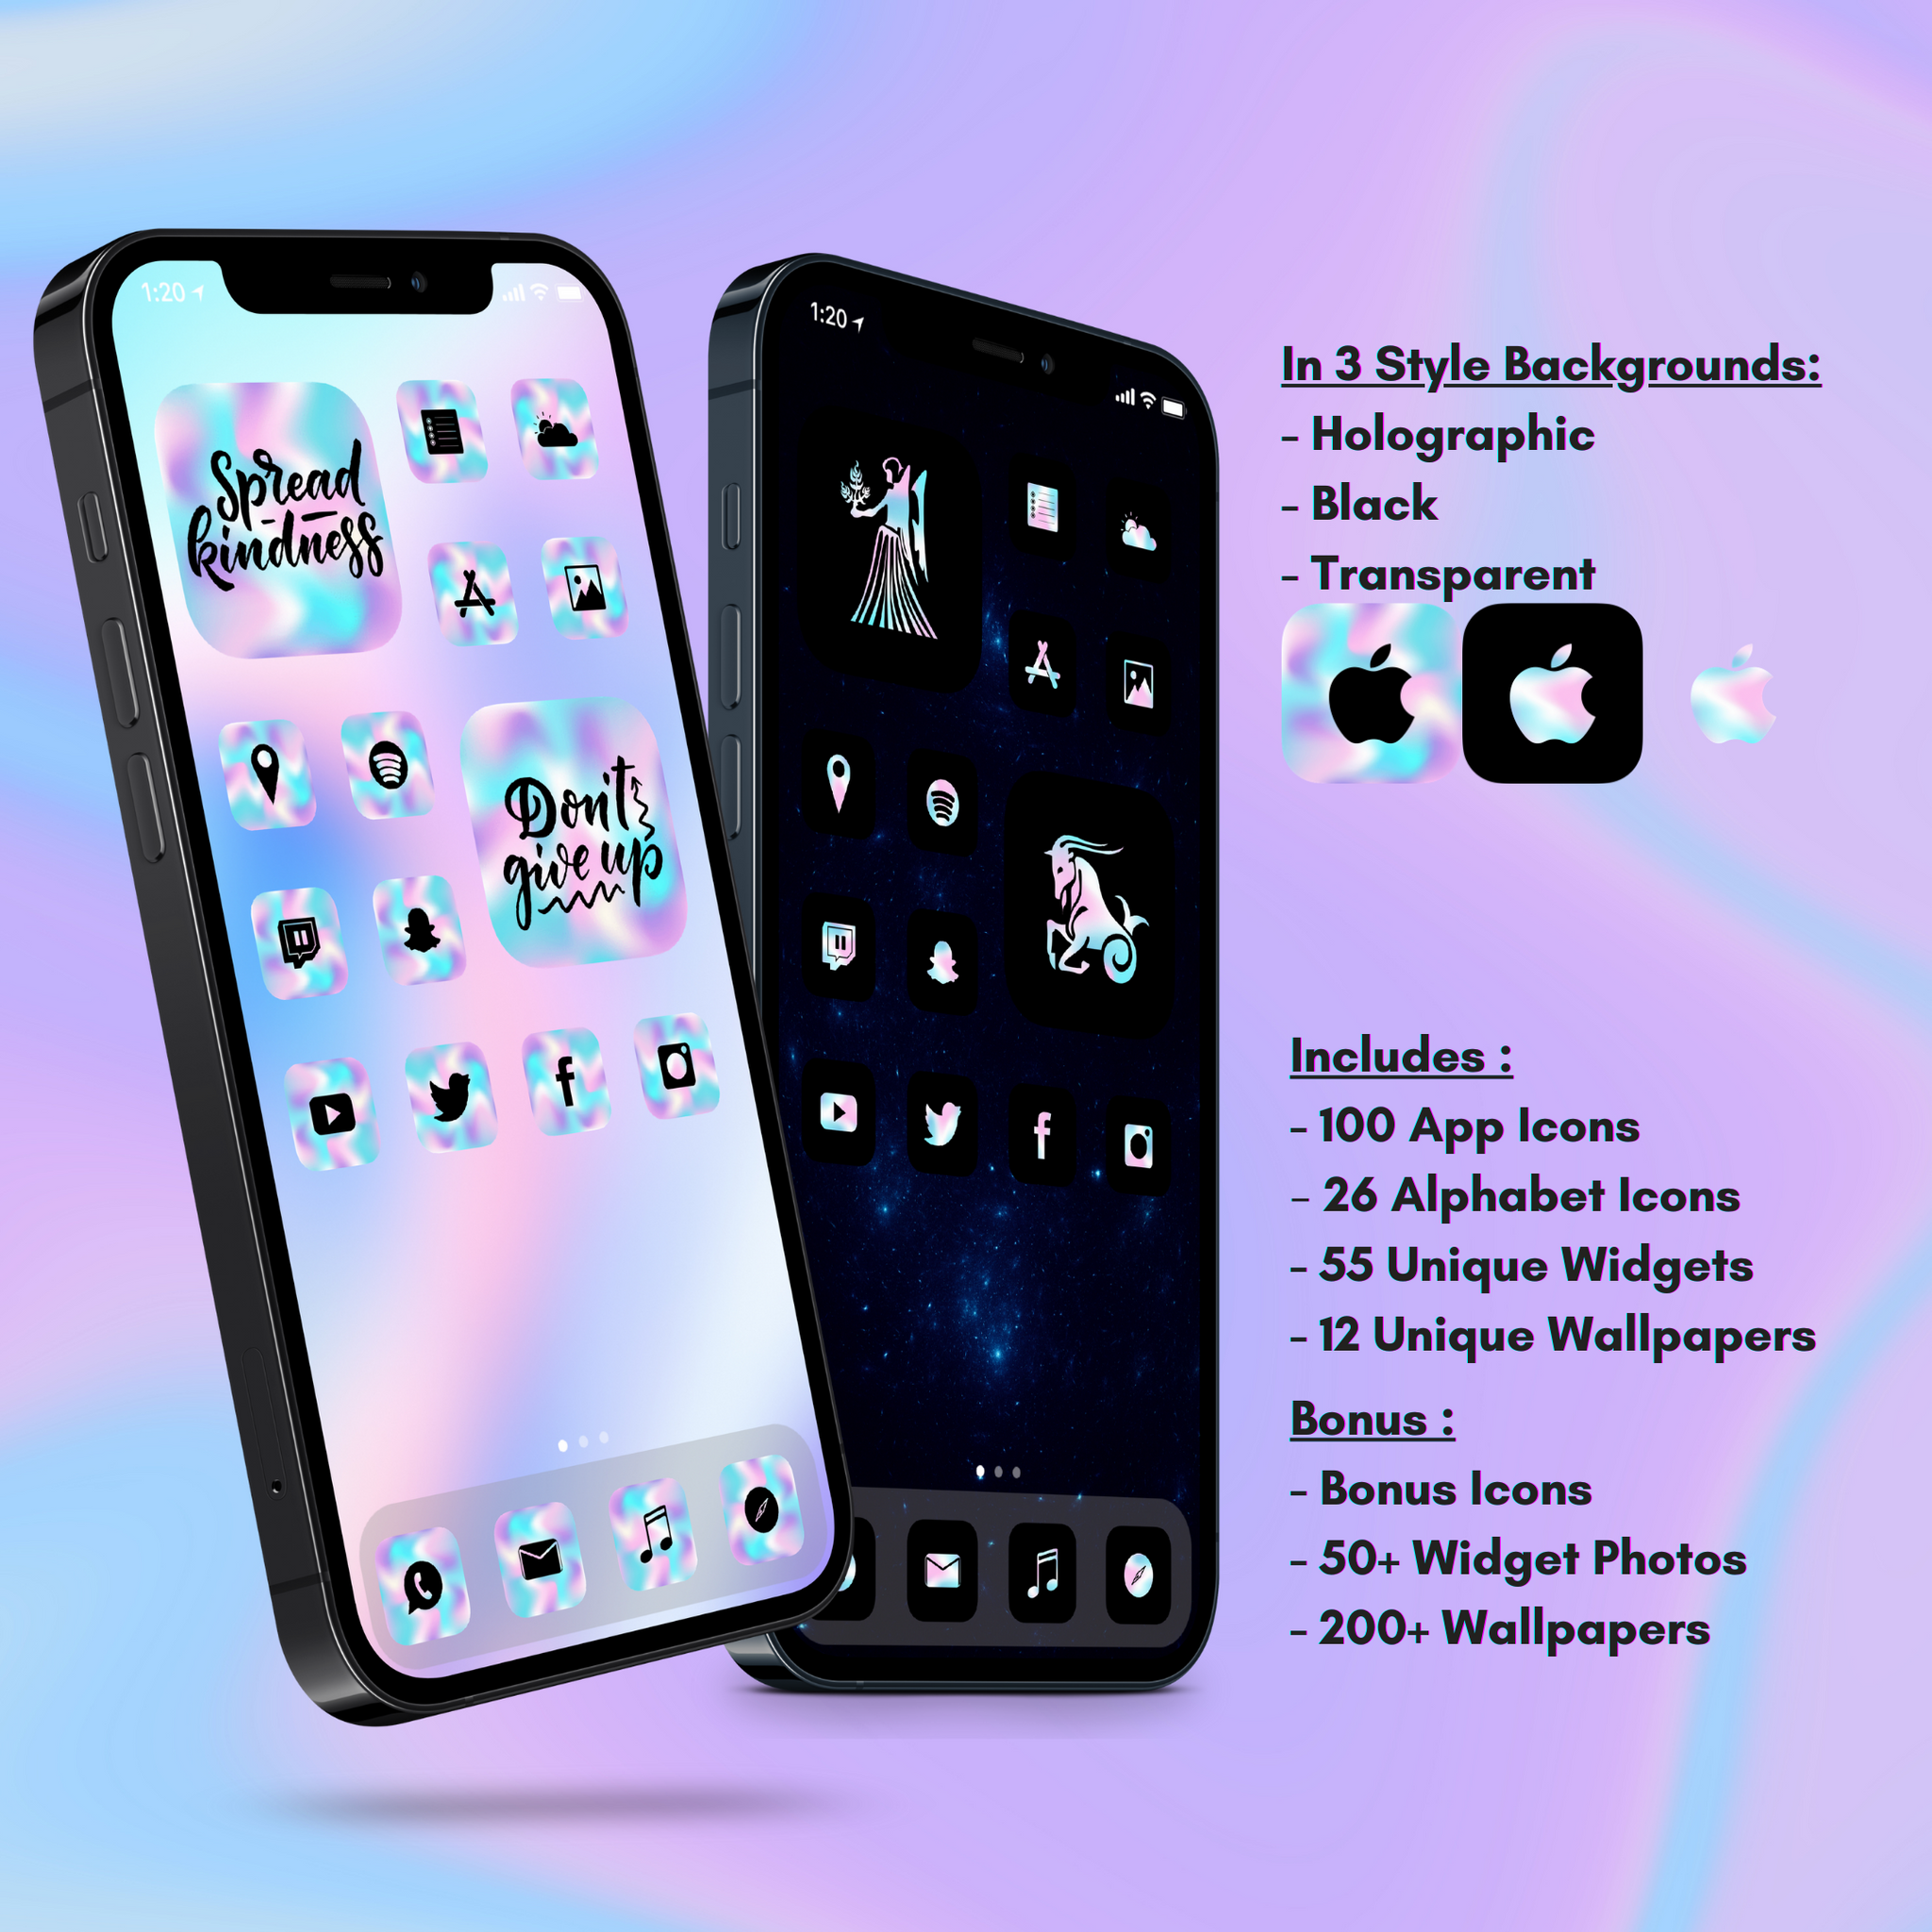 360 Holographic Icon Pack Ios 14 App Icons Social Media Icons Aesth Game Cb